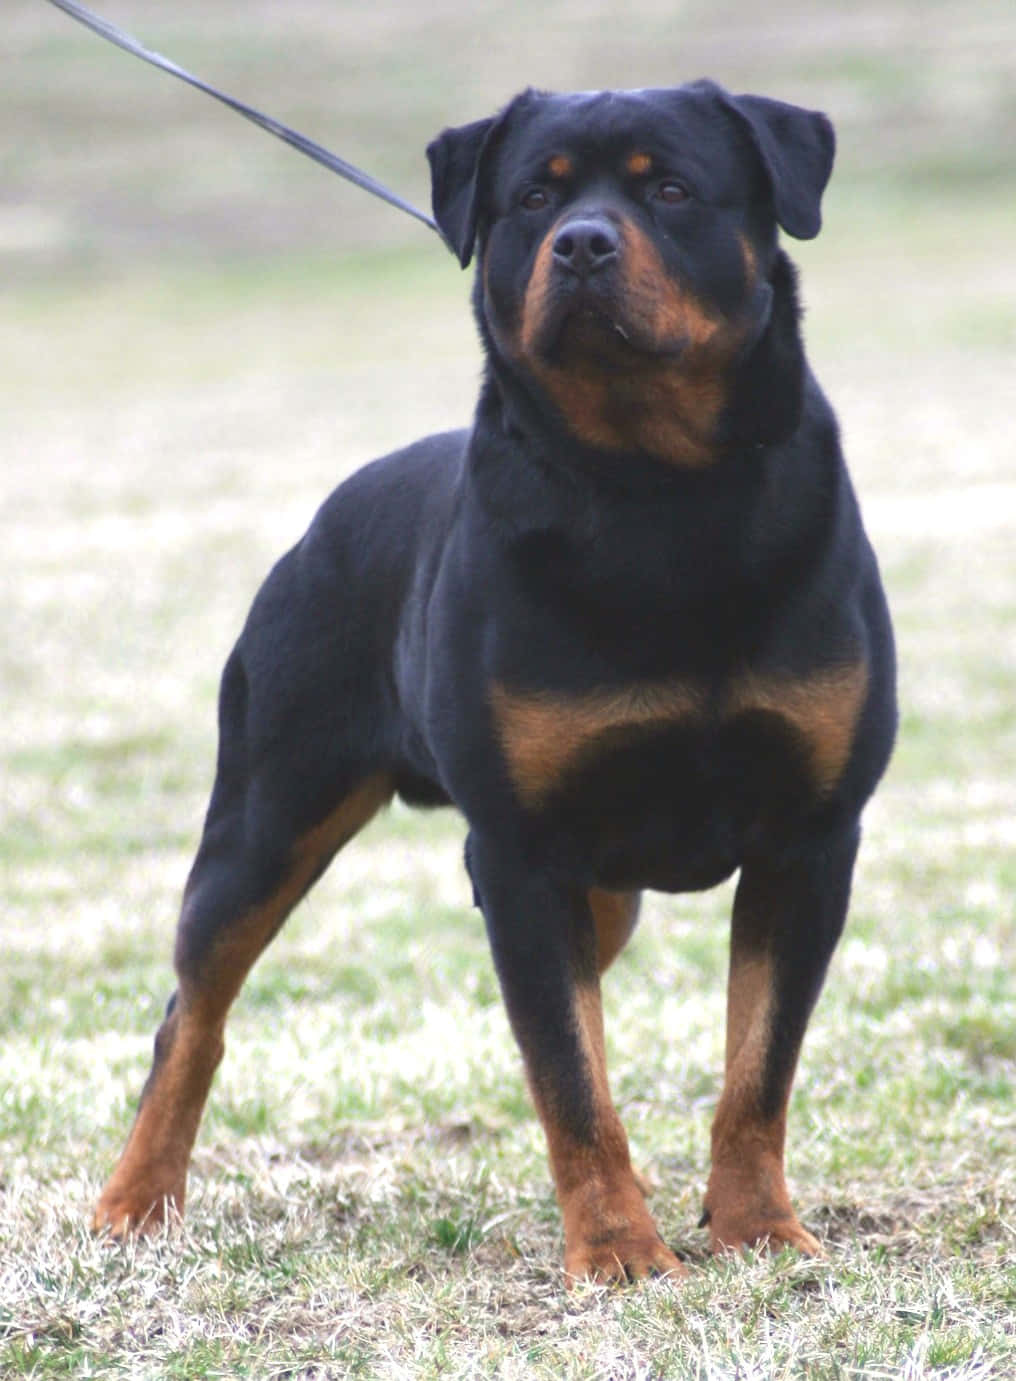 A beautiful Rottweiler pup, posing for a photo